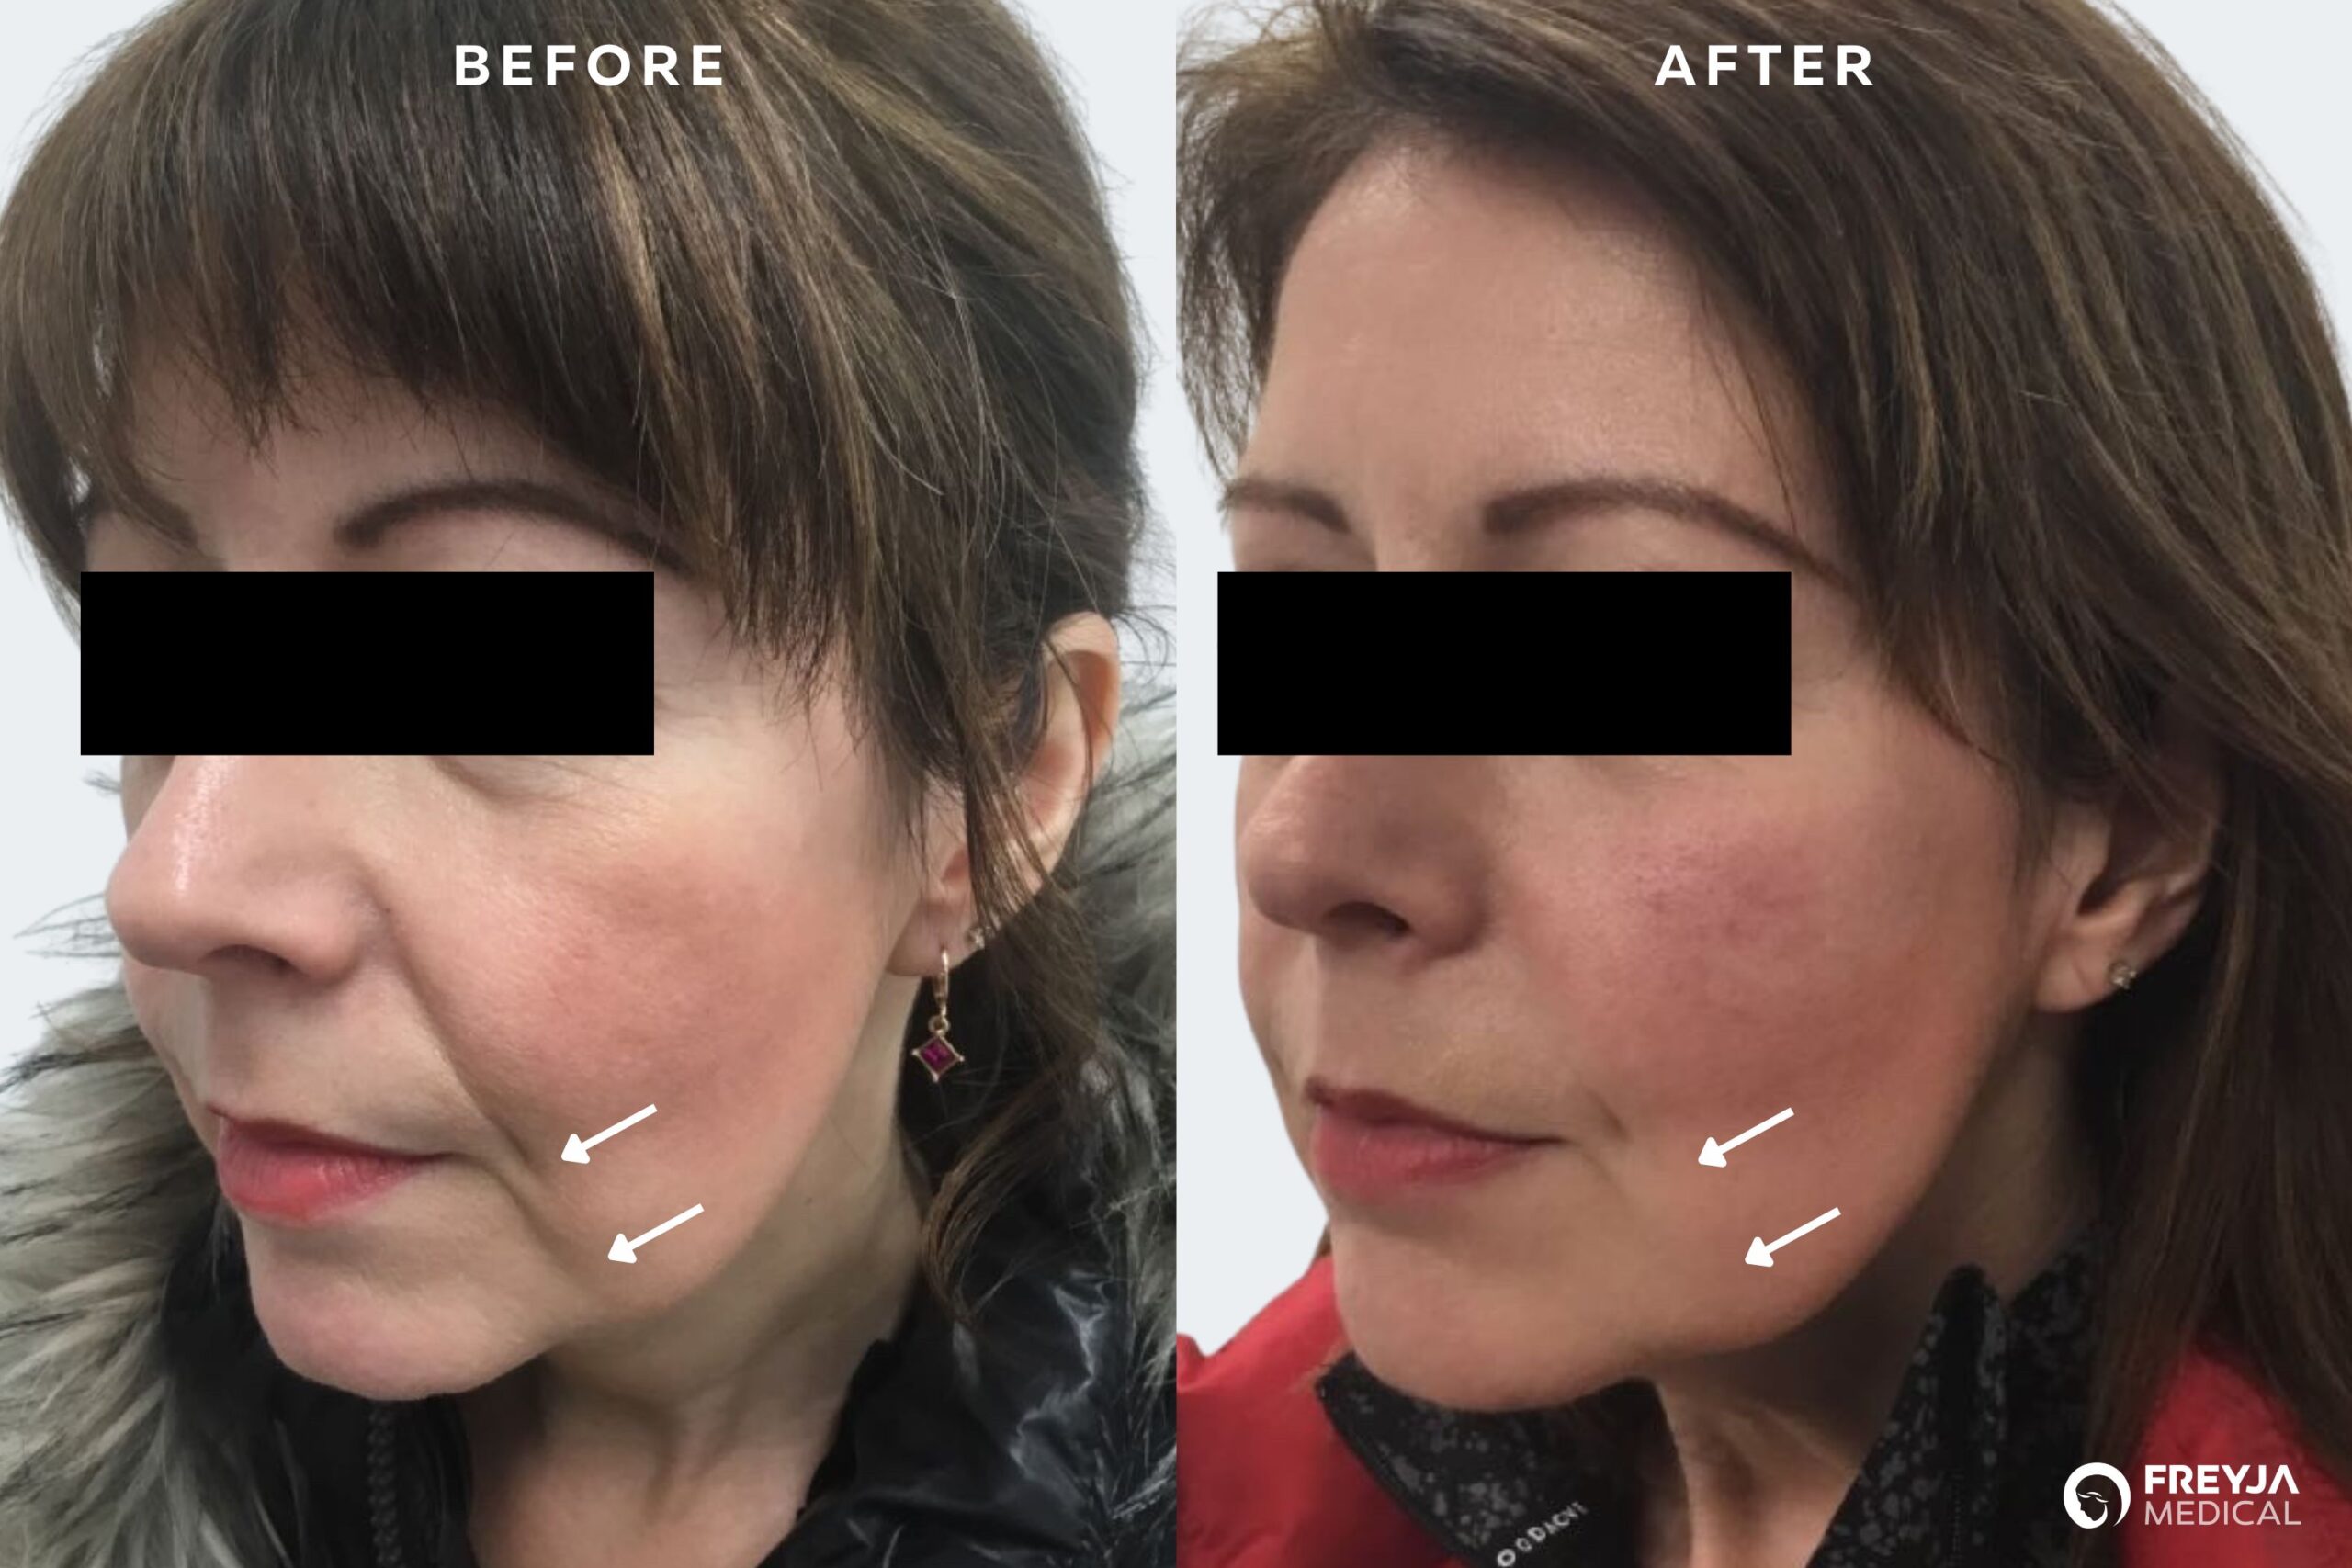 Marionette lines before and after dermal fillers treatment at Freyja Medical in Wrexham, Nantwich and Cheshire